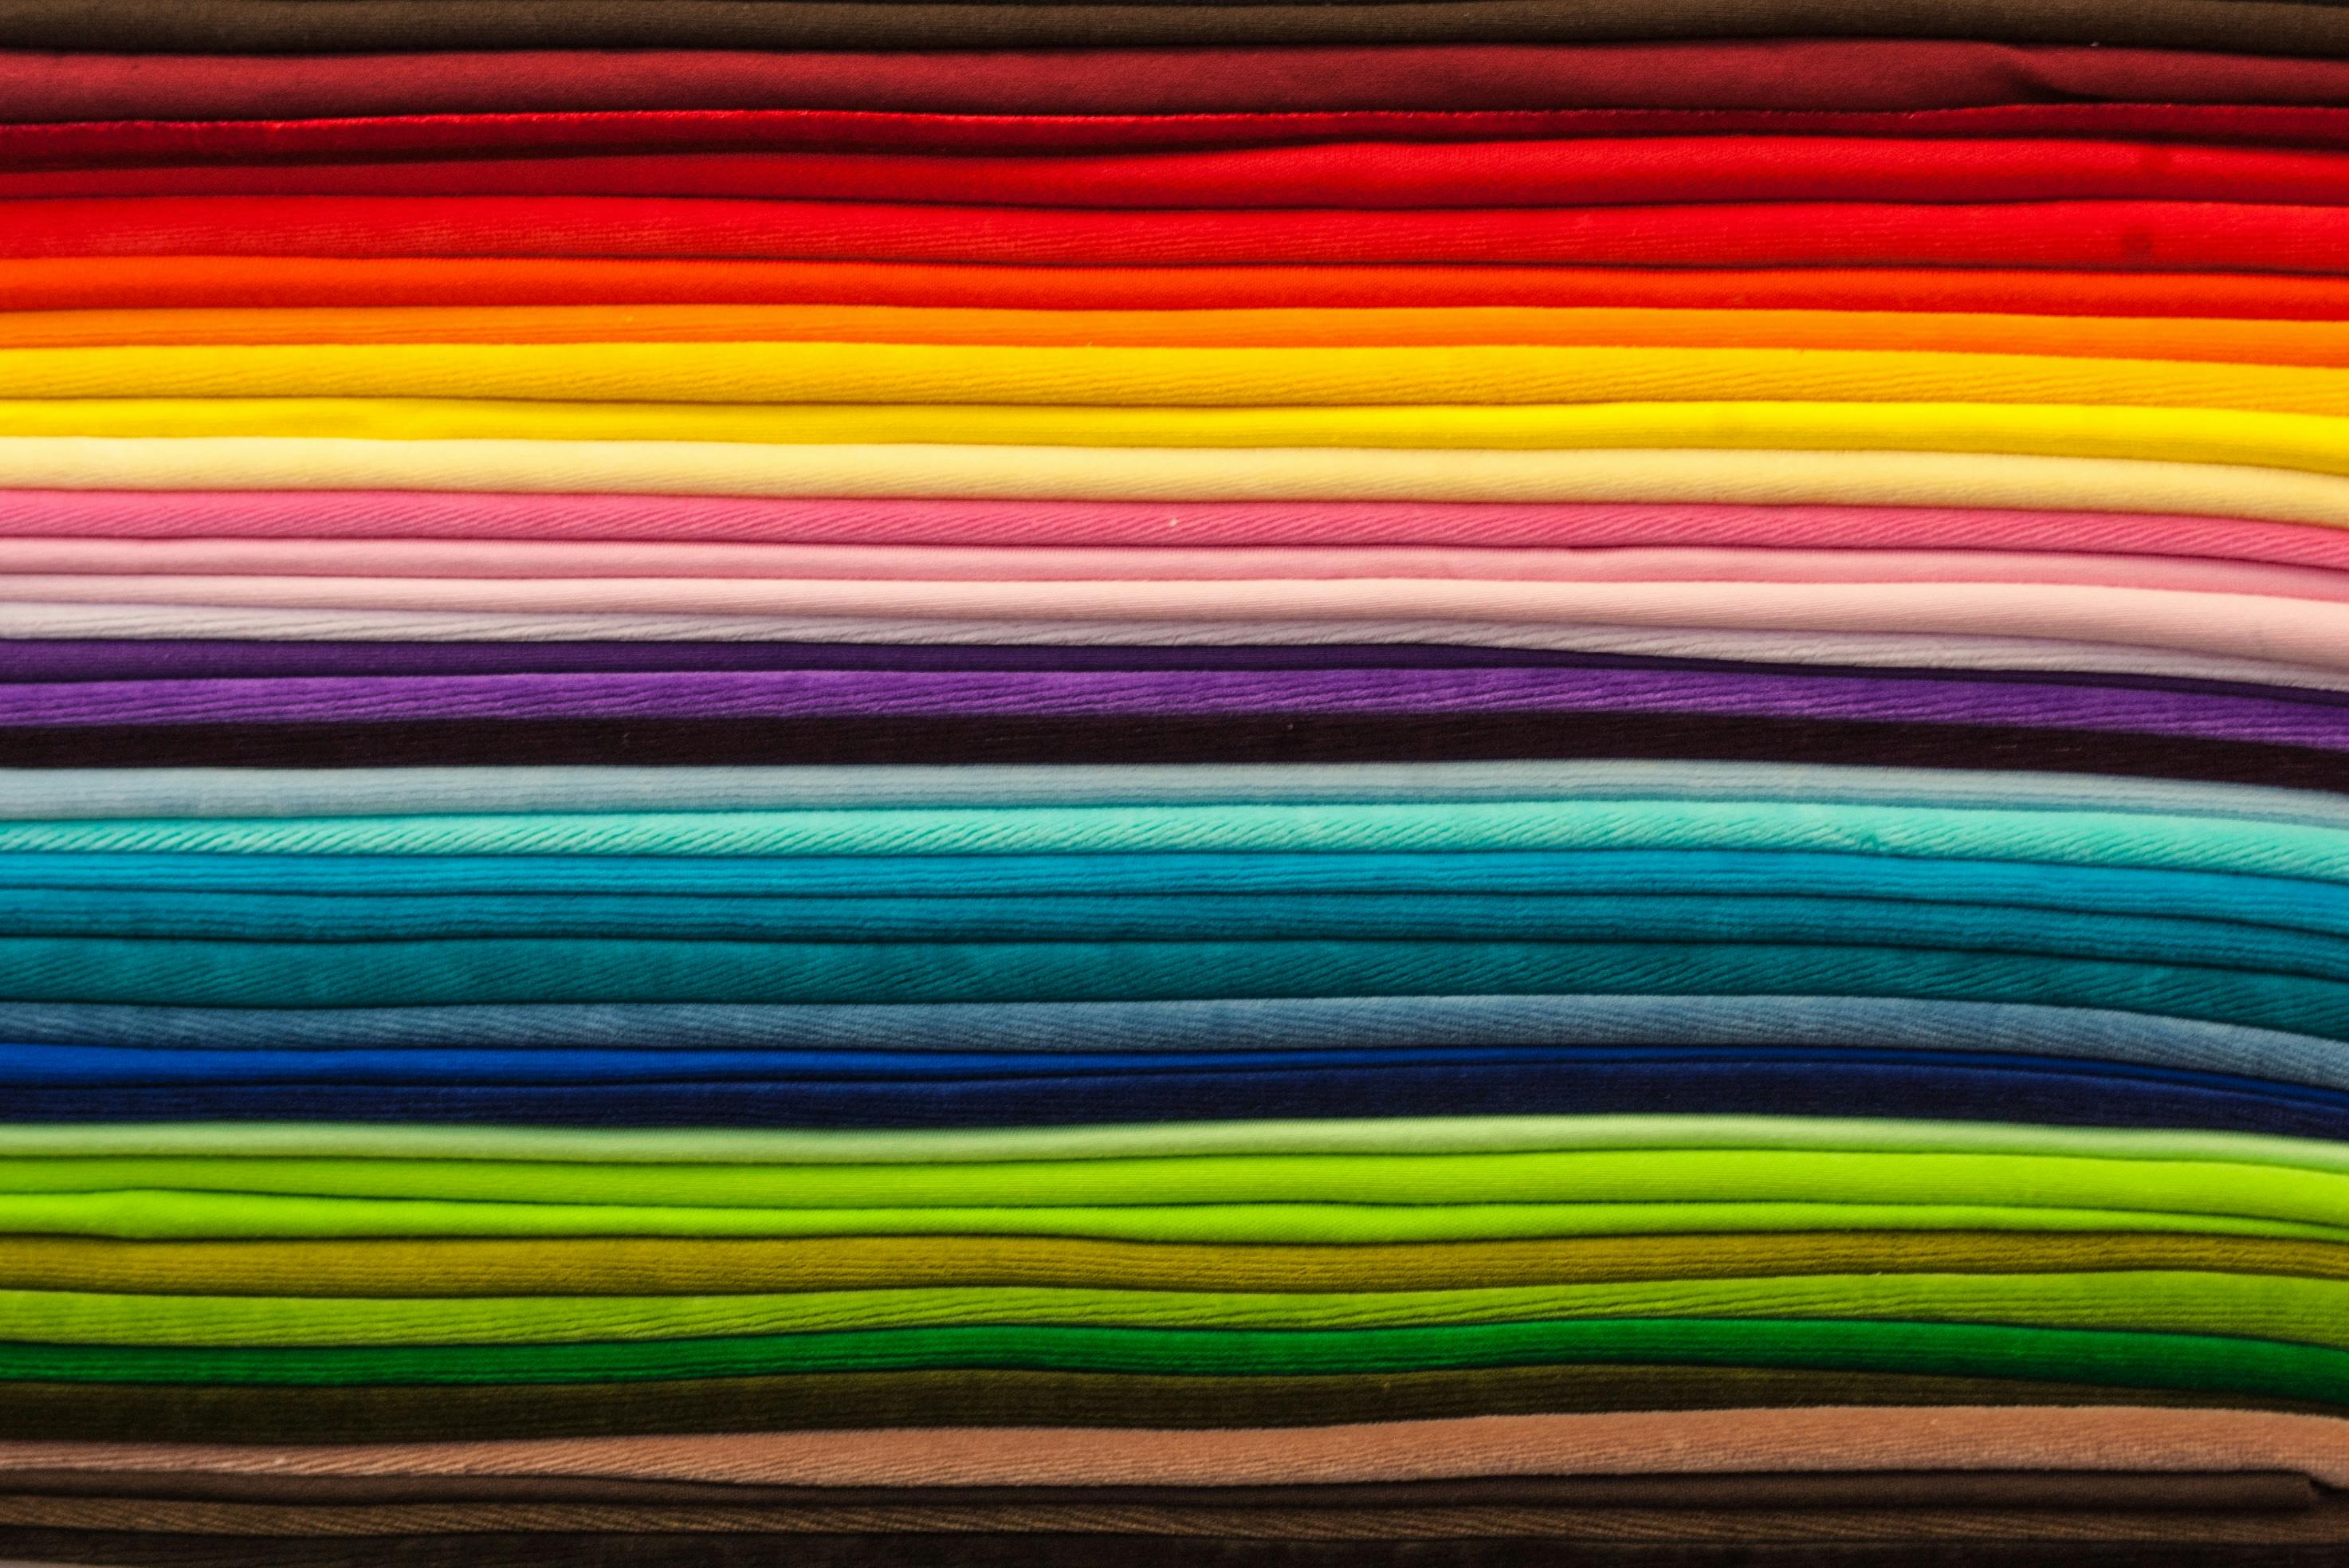 Textile art, stack of fabric in a rainbow of colors